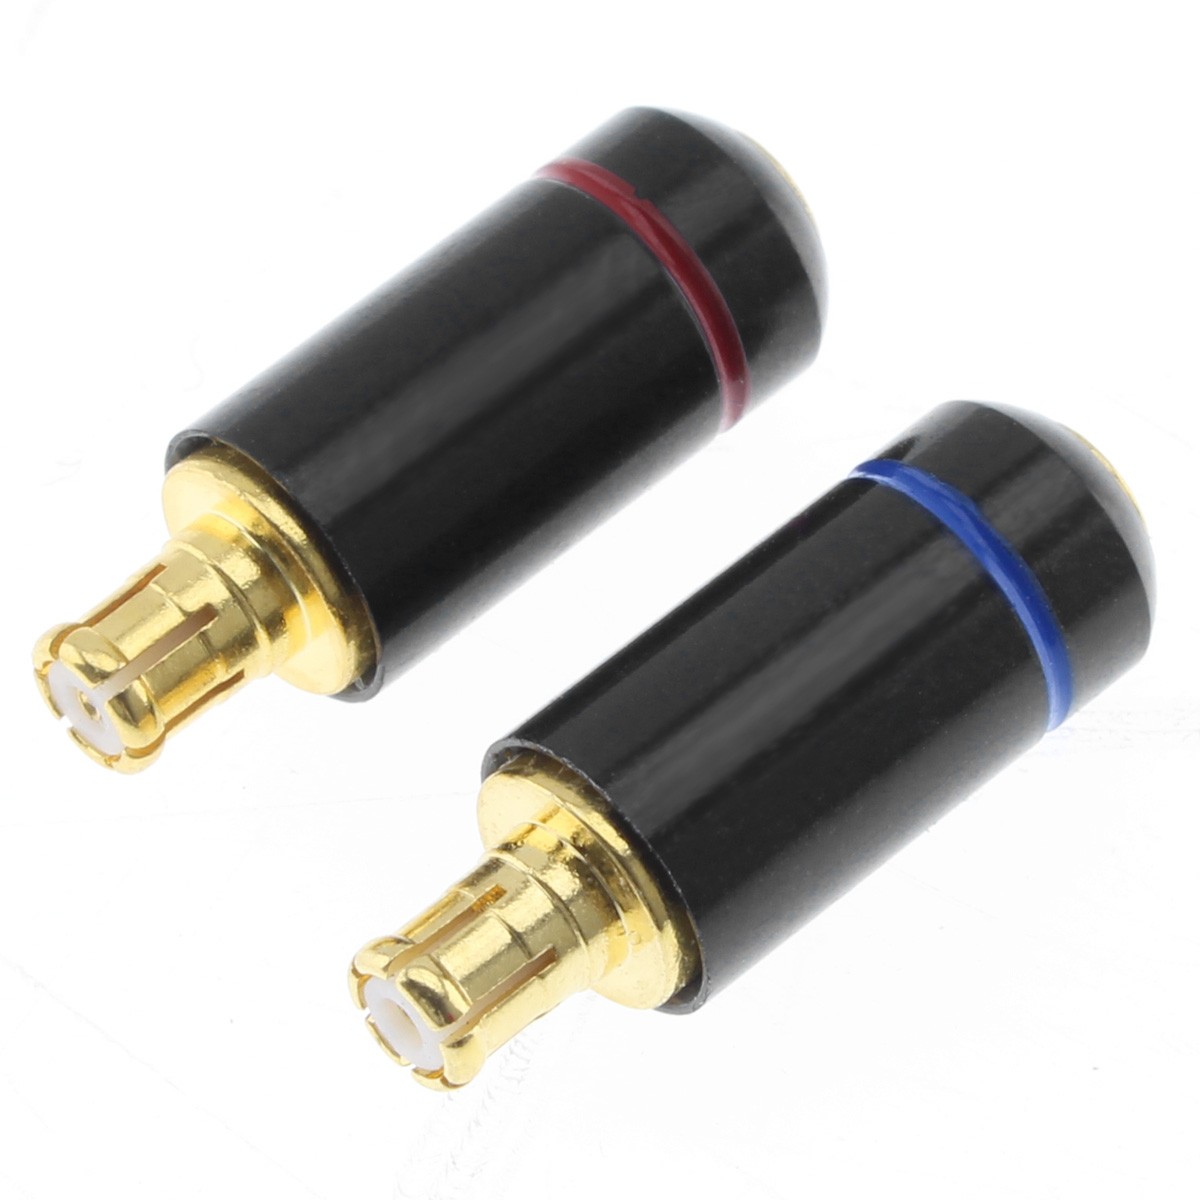 MMCX Female to A2DC Male Gold Plated Adapters (Pair)